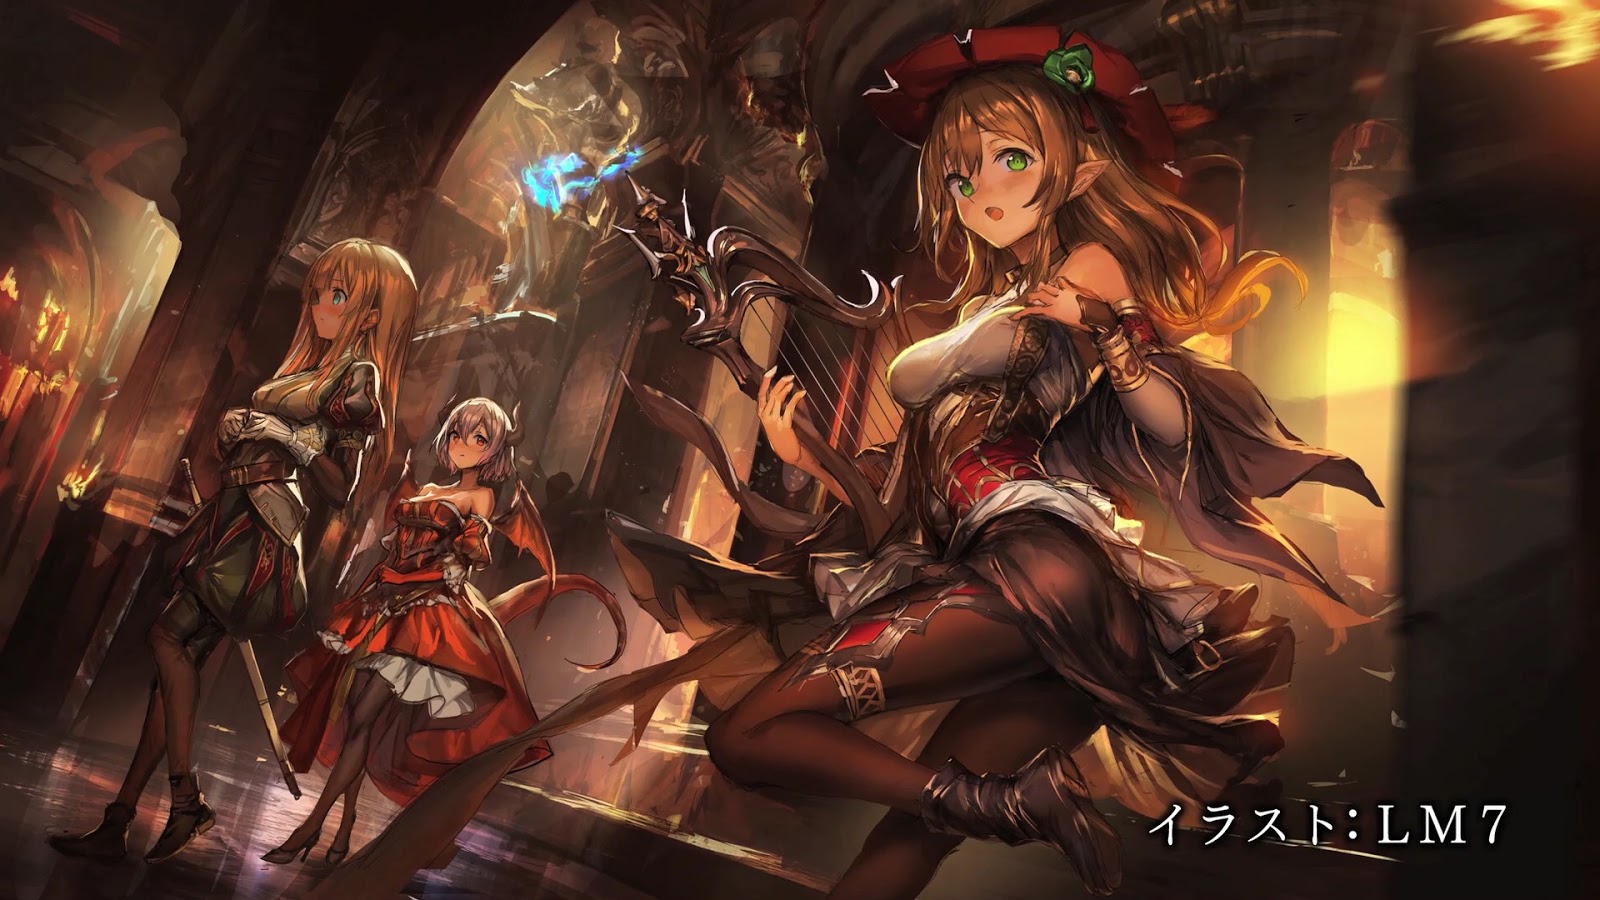 Anne & Grea [Manaria Friends]  Anime, Friends, Art reference